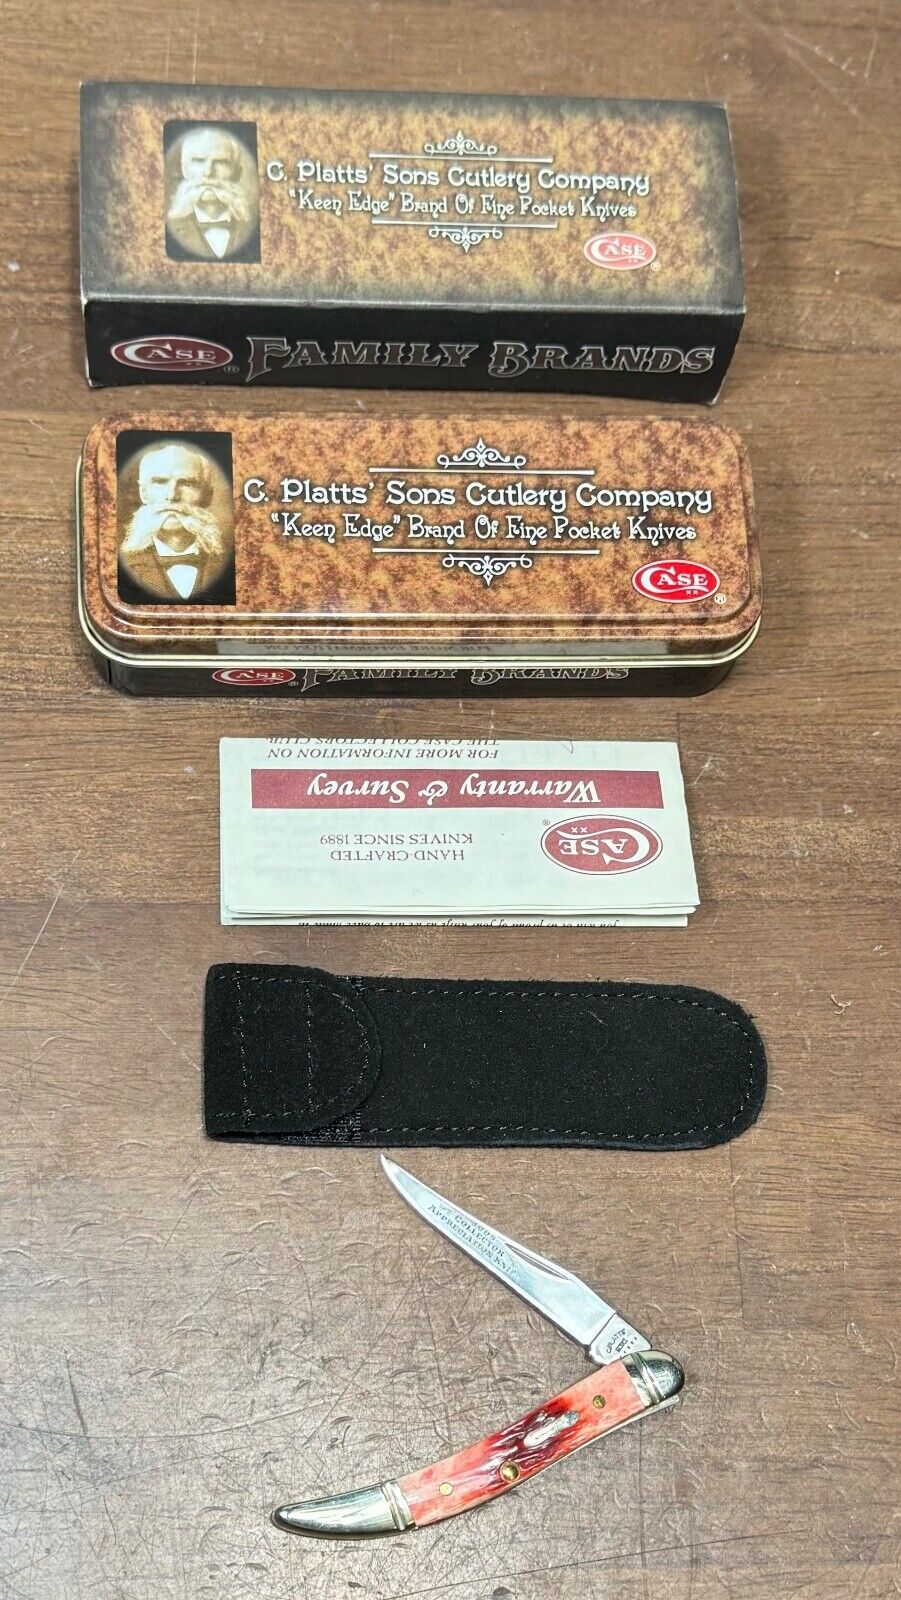 Case- C Platts’ Sons 2005 610096 SS Texas Toothpick red pocket Knife